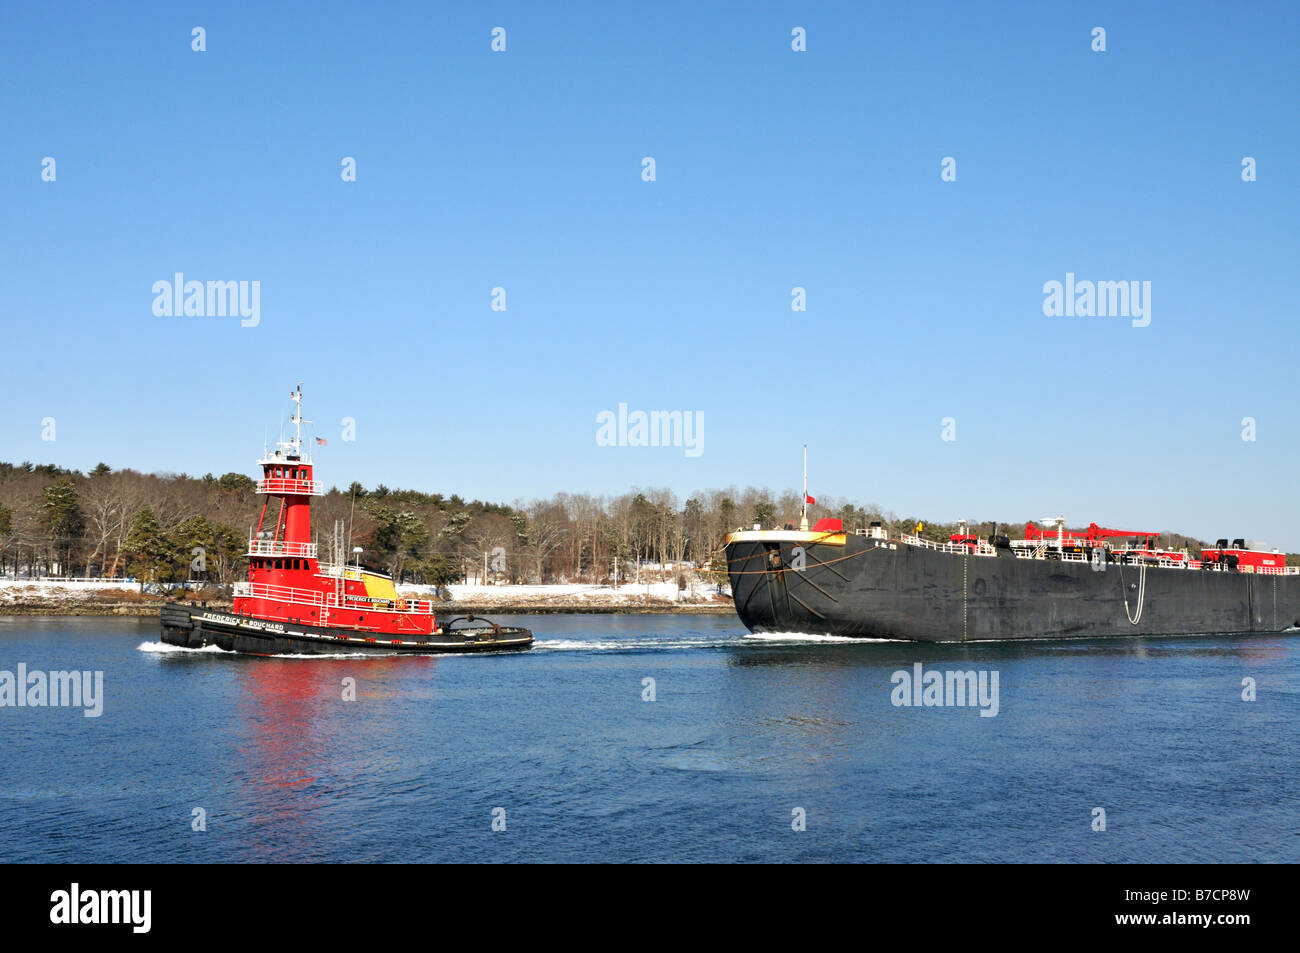 Red tugboat pulling barge through canal Stock Photo